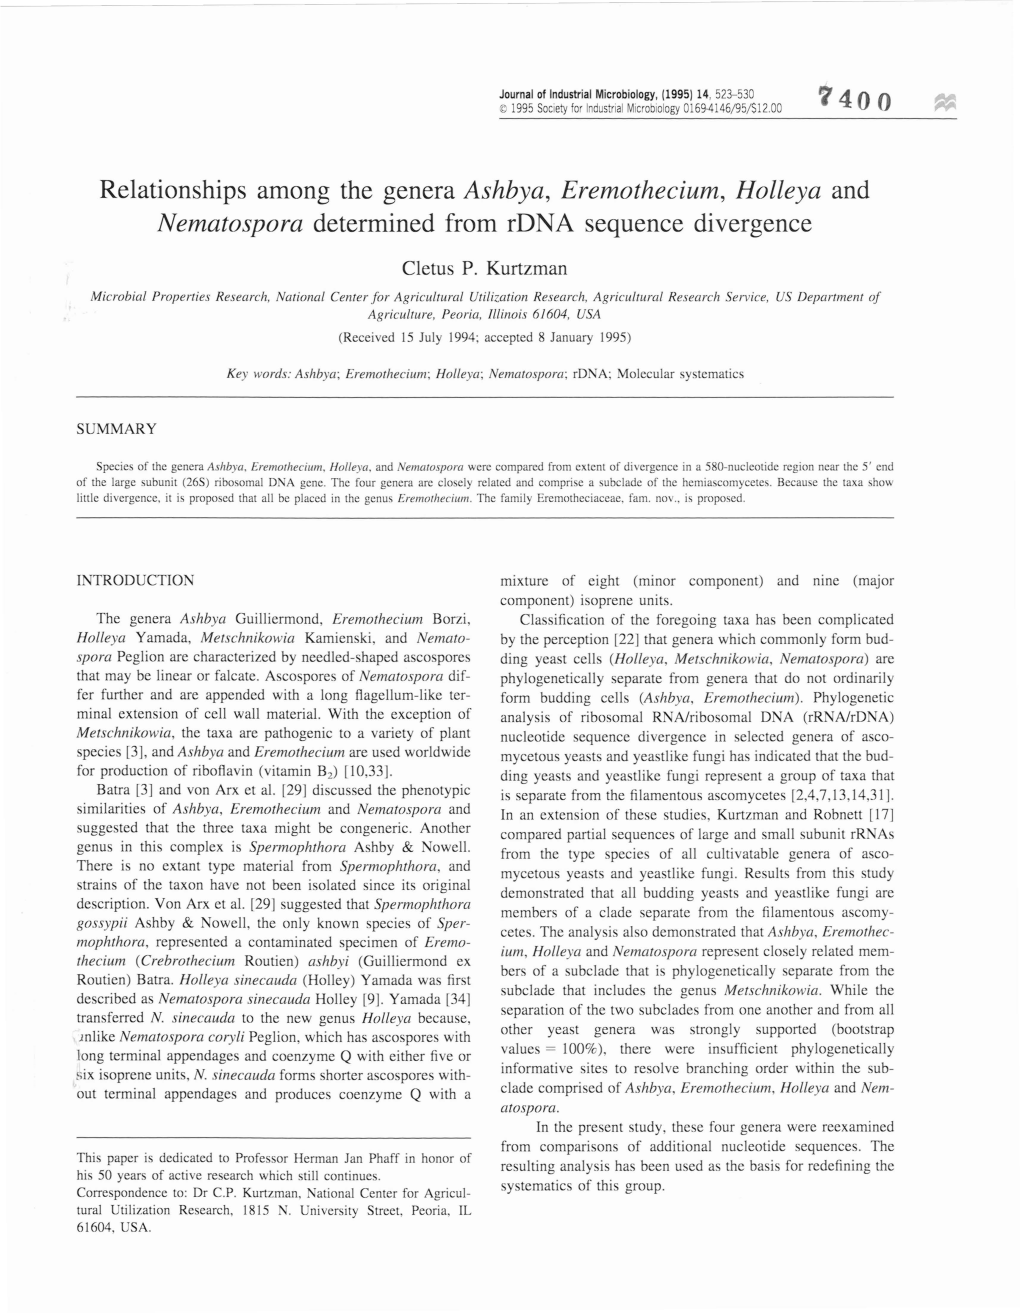 Relationships Among the Genera Ashbya, Eremothecium, Holleya and Nematospora Determined from Rdna Sequence Divergence